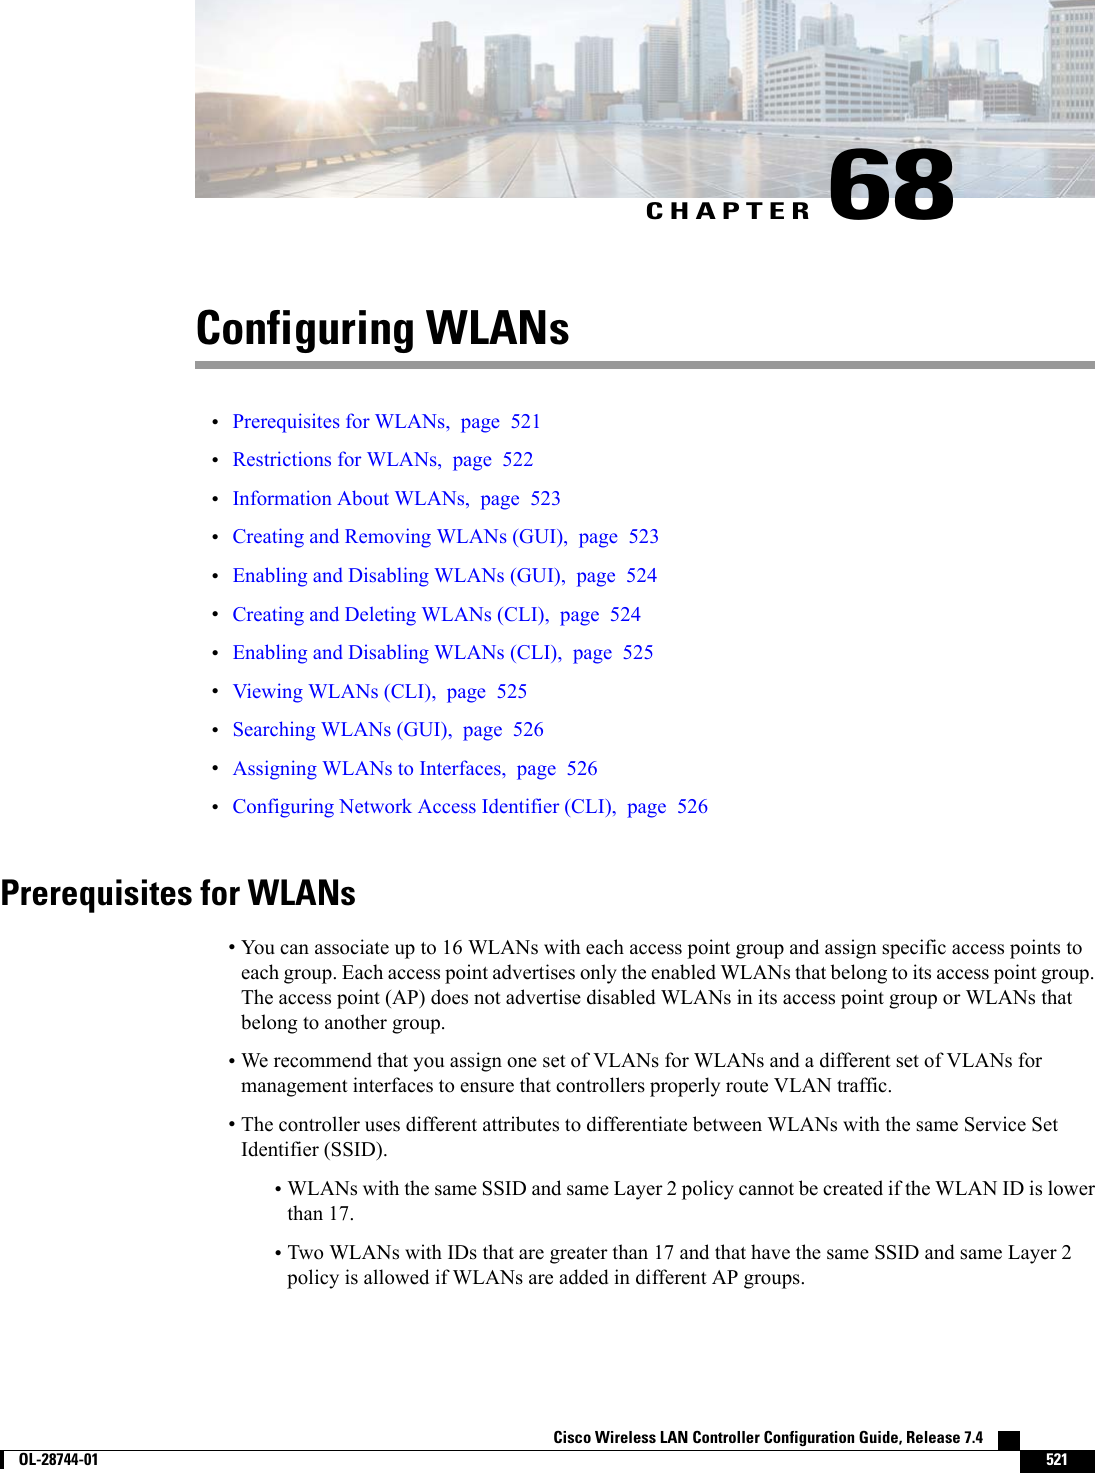 CHAPTER 68Configuring WLANs•Prerequisites for WLANs, page 521•Restrictions for WLANs, page 522•Information About WLANs, page 523•Creating and Removing WLANs (GUI), page 523•Enabling and Disabling WLANs (GUI), page 524•Creating and Deleting WLANs (CLI), page 524•Enabling and Disabling WLANs (CLI), page 525•Viewing WLANs (CLI), page 525•Searching WLANs (GUI), page 526•Assigning WLANs to Interfaces, page 526•Configuring Network Access Identifier (CLI), page 526Prerequisites for WLANs•You can associate up to 16 WLANs with each access point group and assign specific access points toeach group. Each access point advertises only the enabled WLANs that belong to its access point group.The access point (AP) does not advertise disabled WLANs in its access point group or WLANs thatbelong to another group.•We recommend that you assign one set of VLANs for WLANs and a different set of VLANs formanagement interfaces to ensure that controllers properly route VLAN traffic.•The controller uses different attributes to differentiate between WLANs with the same Service SetIdentifier (SSID).•WLANs with the same SSID and same Layer 2 policy cannot be created if the WLAN ID is lowerthan 17.•Two WLANs with IDs that are greater than 17 and that have the same SSID and same Layer 2policy is allowed if WLANs are added in different AP groups.Cisco Wireless LAN Controller Configuration Guide, Release 7.4        OL-28744-01 521